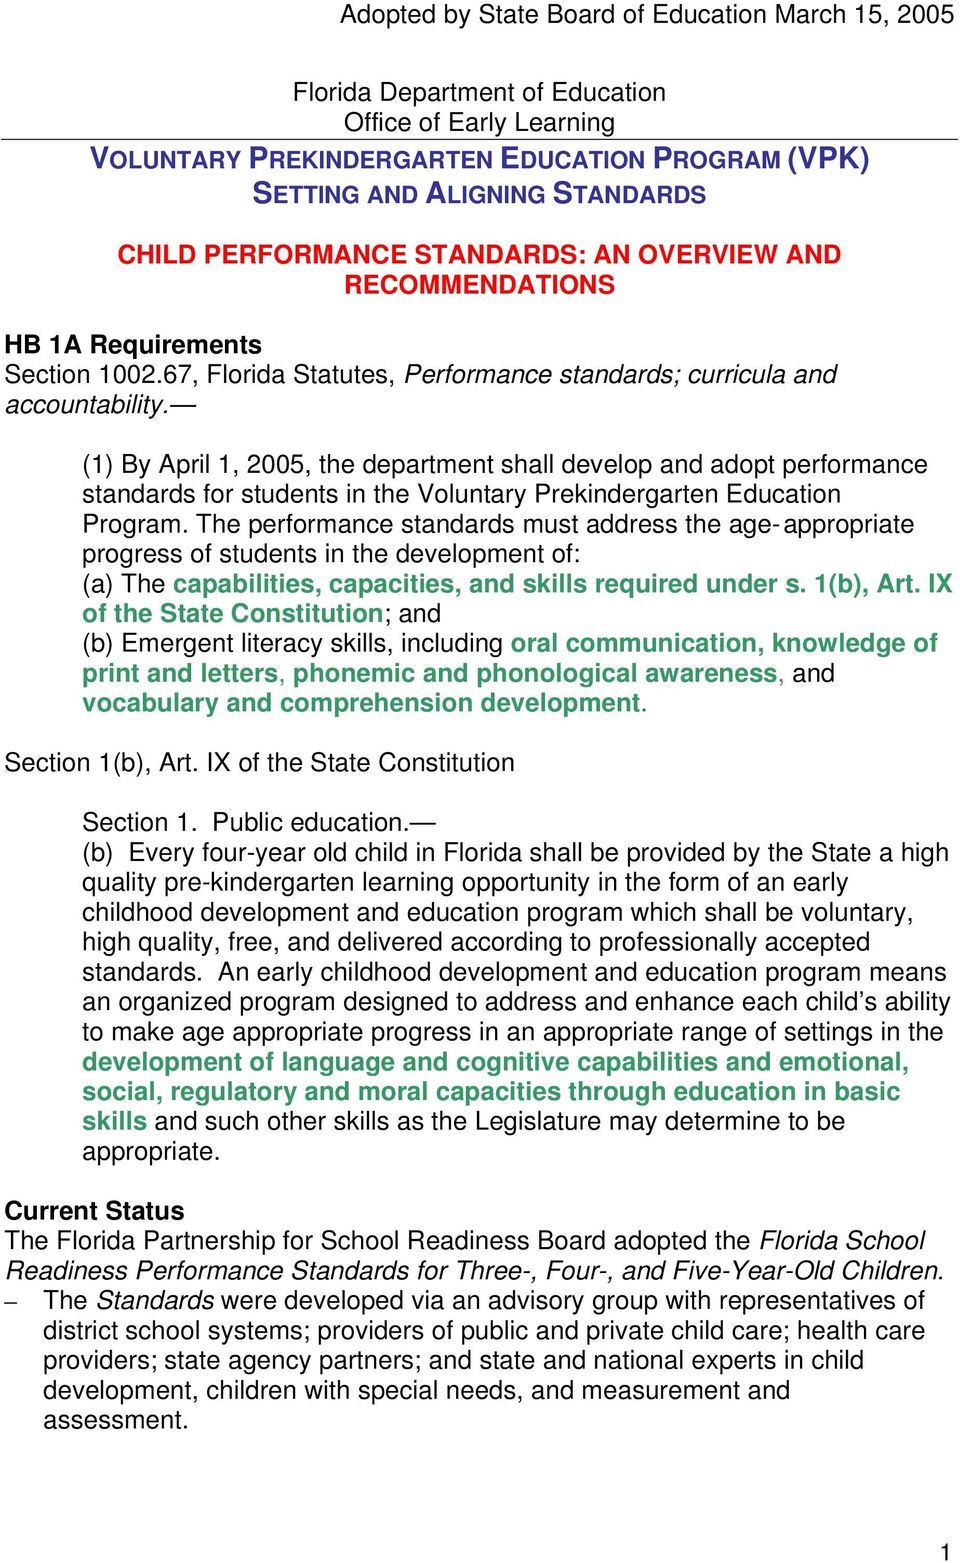 (1) By April 1, 2005, the department shall develop and adopt performance standards for students in the Voluntary Prekindergarten Education Program.